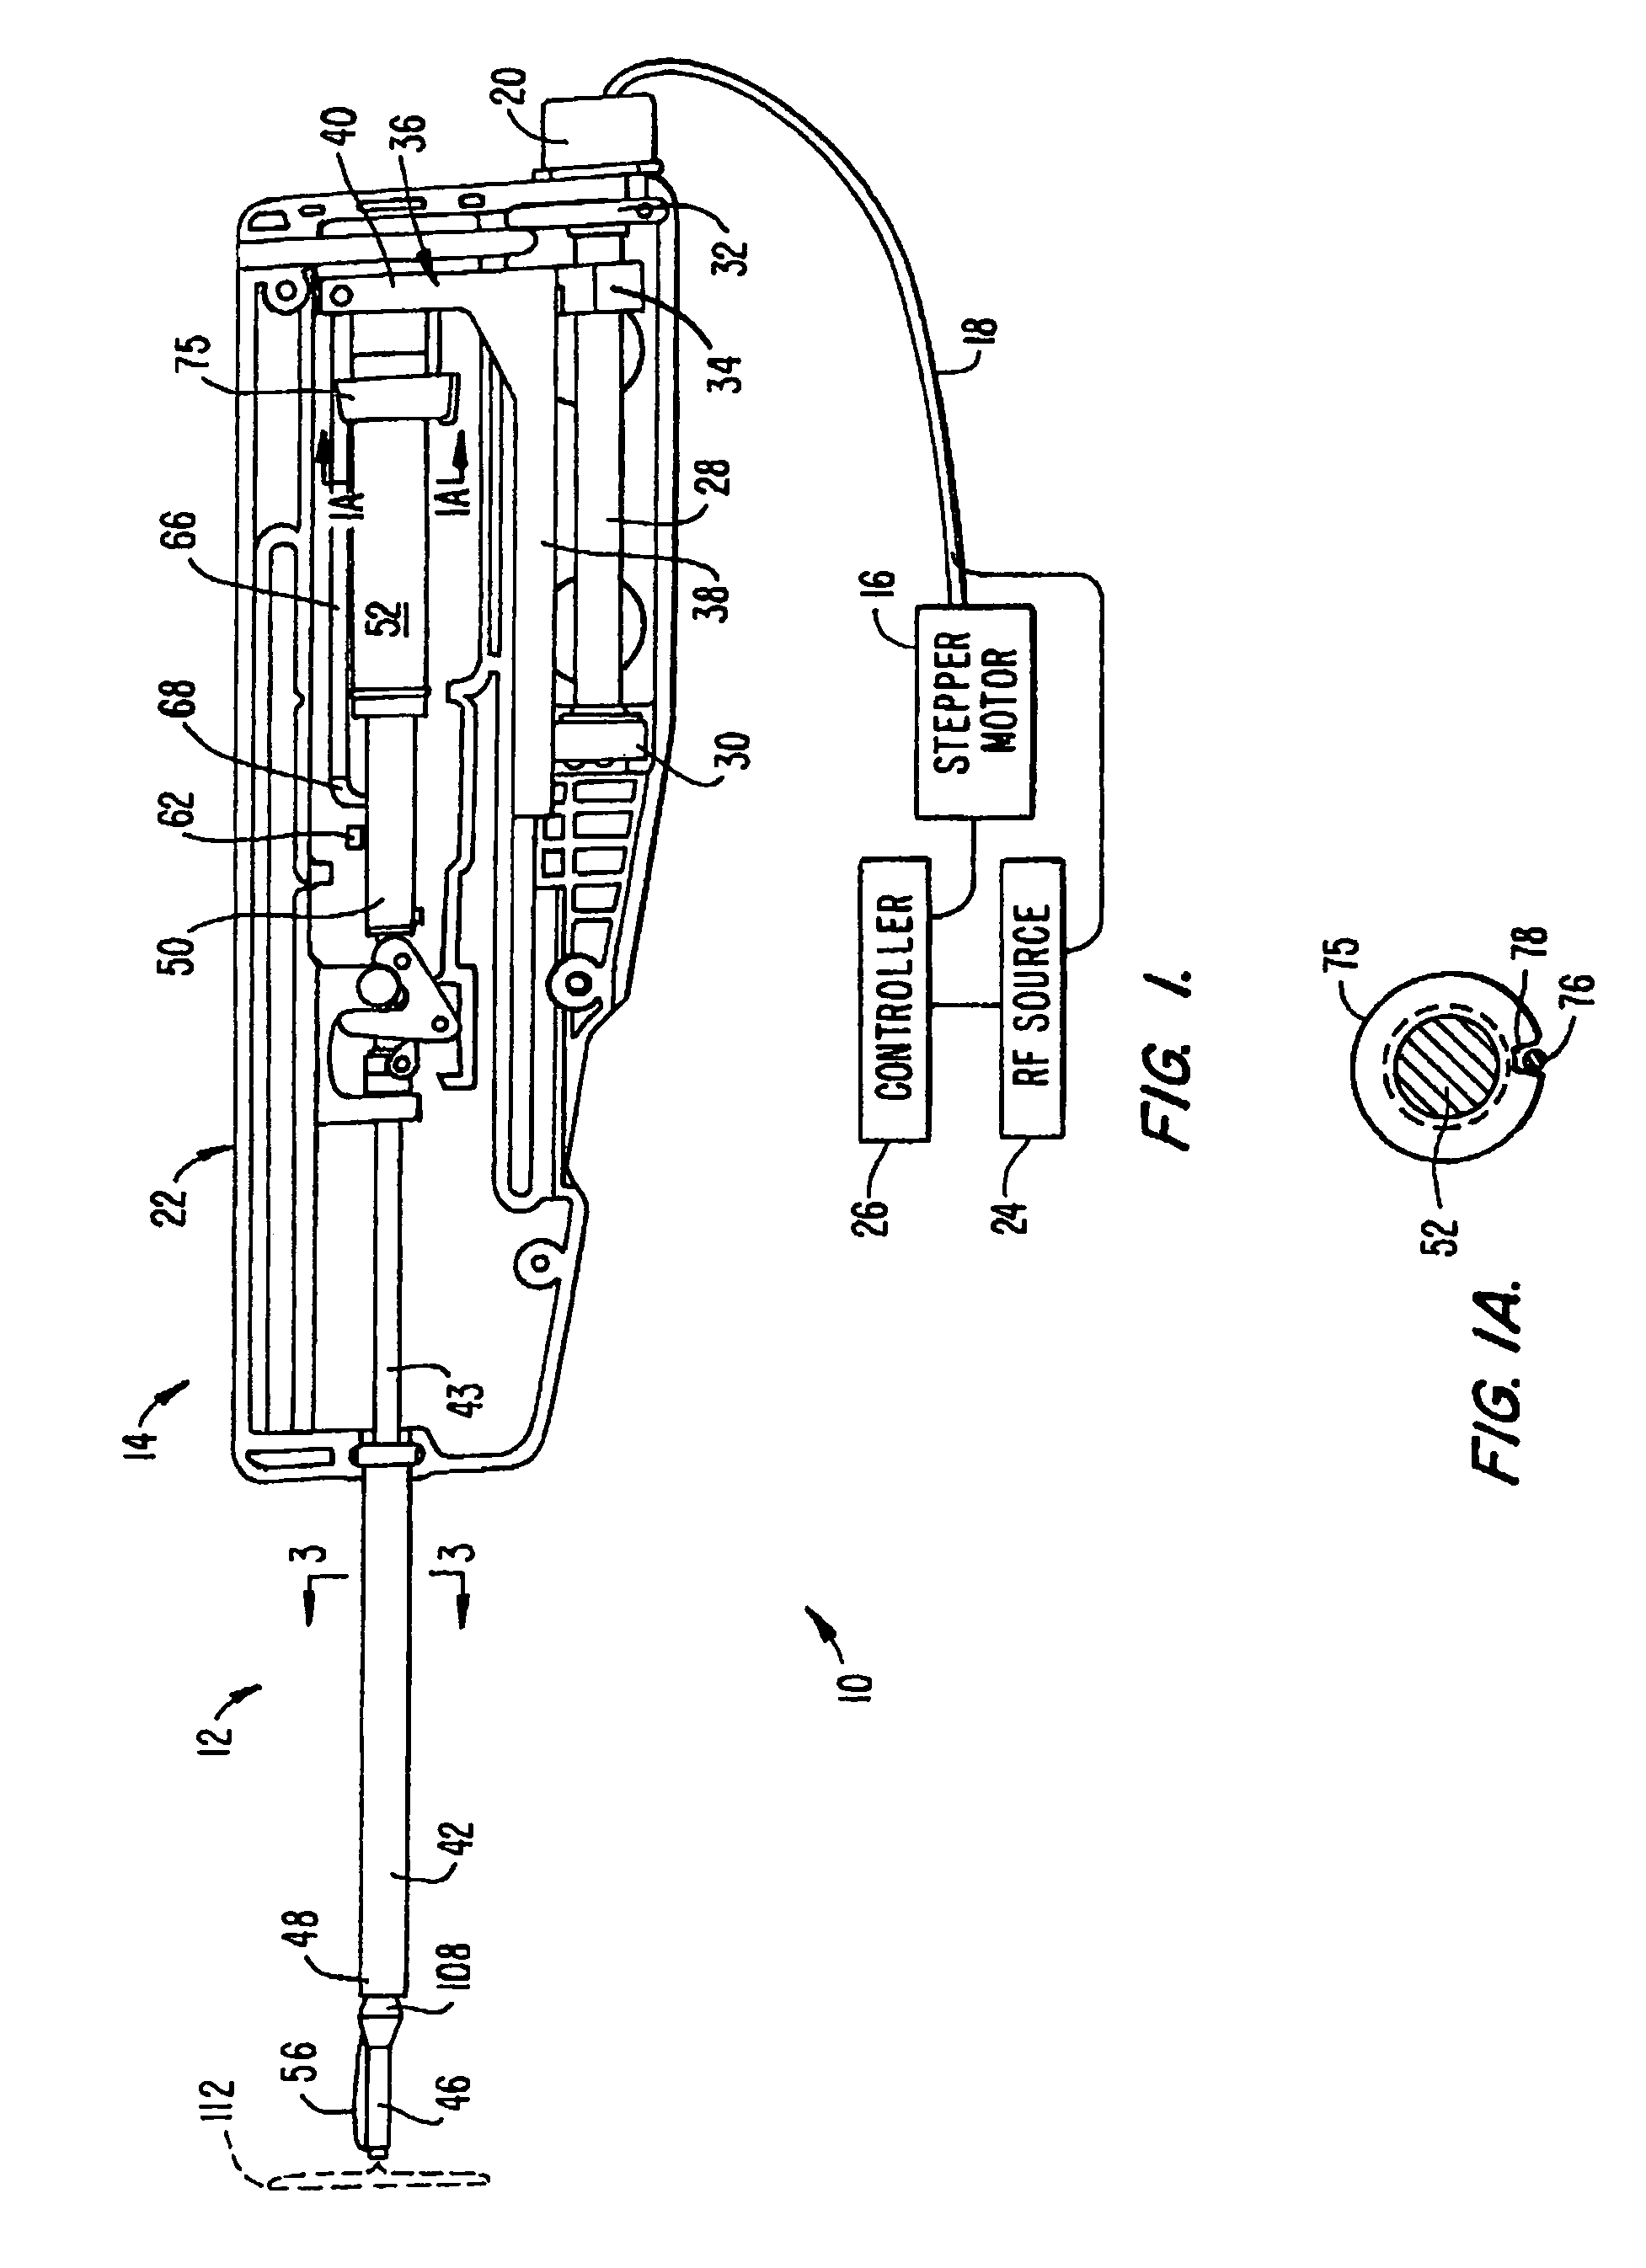 Tissue separating and localizing catheter assembly